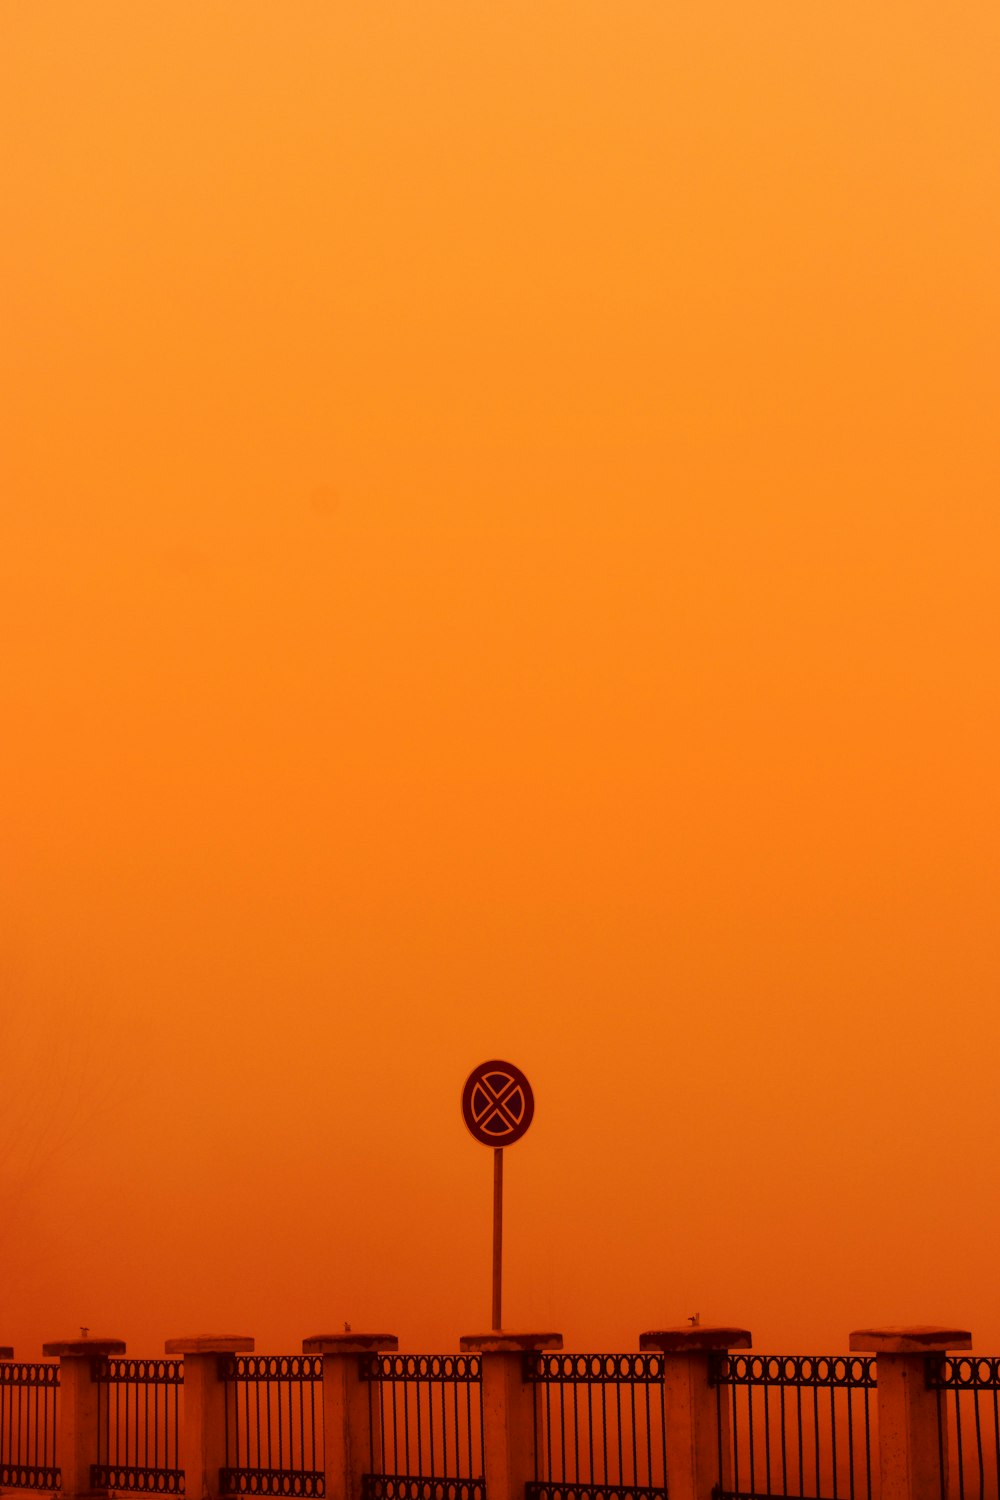 an orange sky with a street sign in the foreground